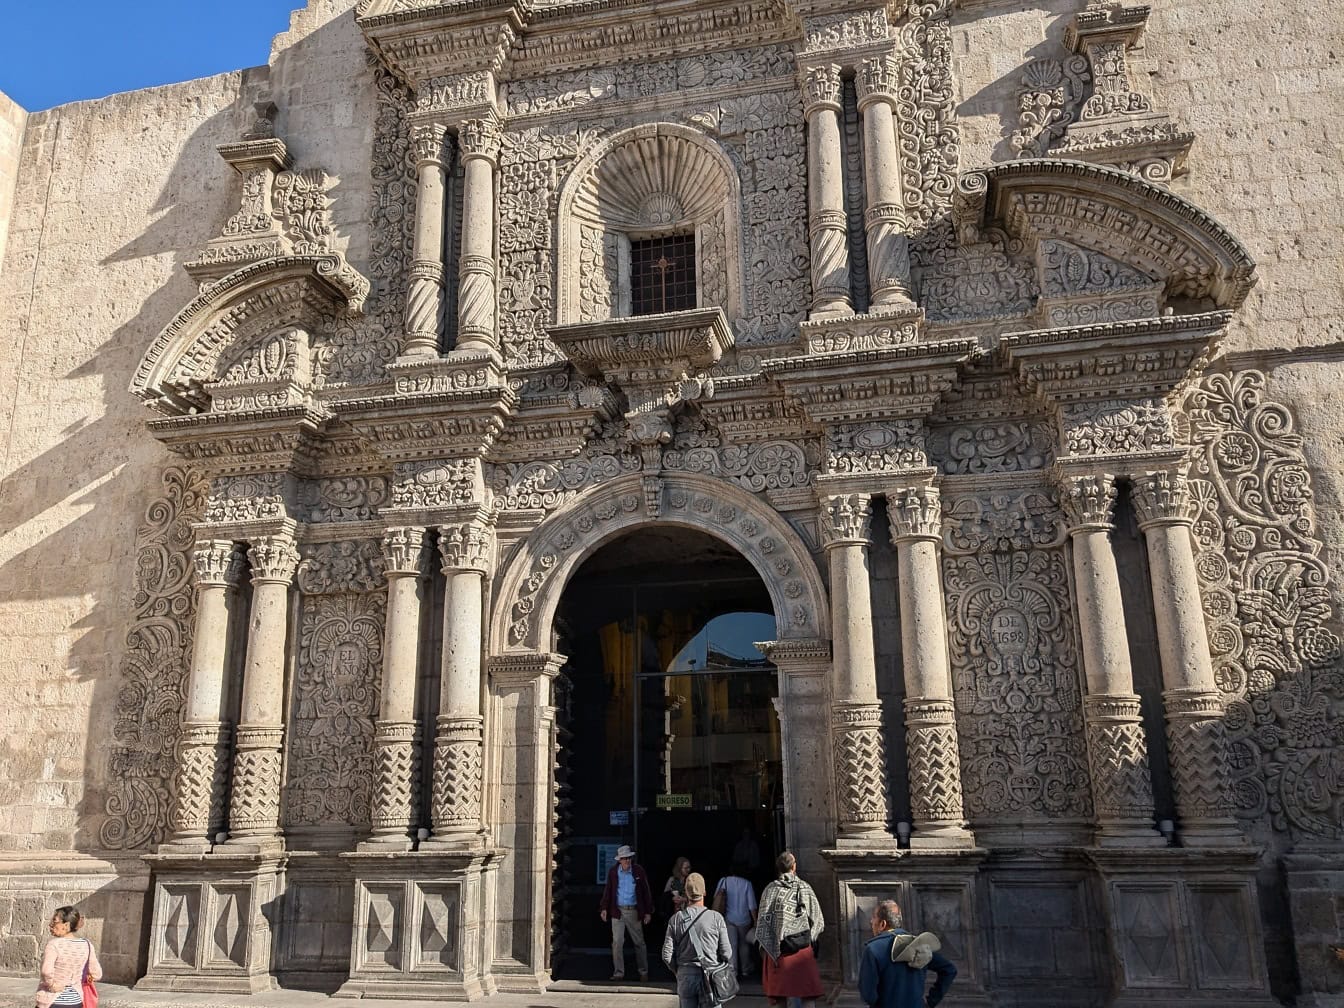 Group of people outside of the church of the Society of Jesus of Arequipa in Peru